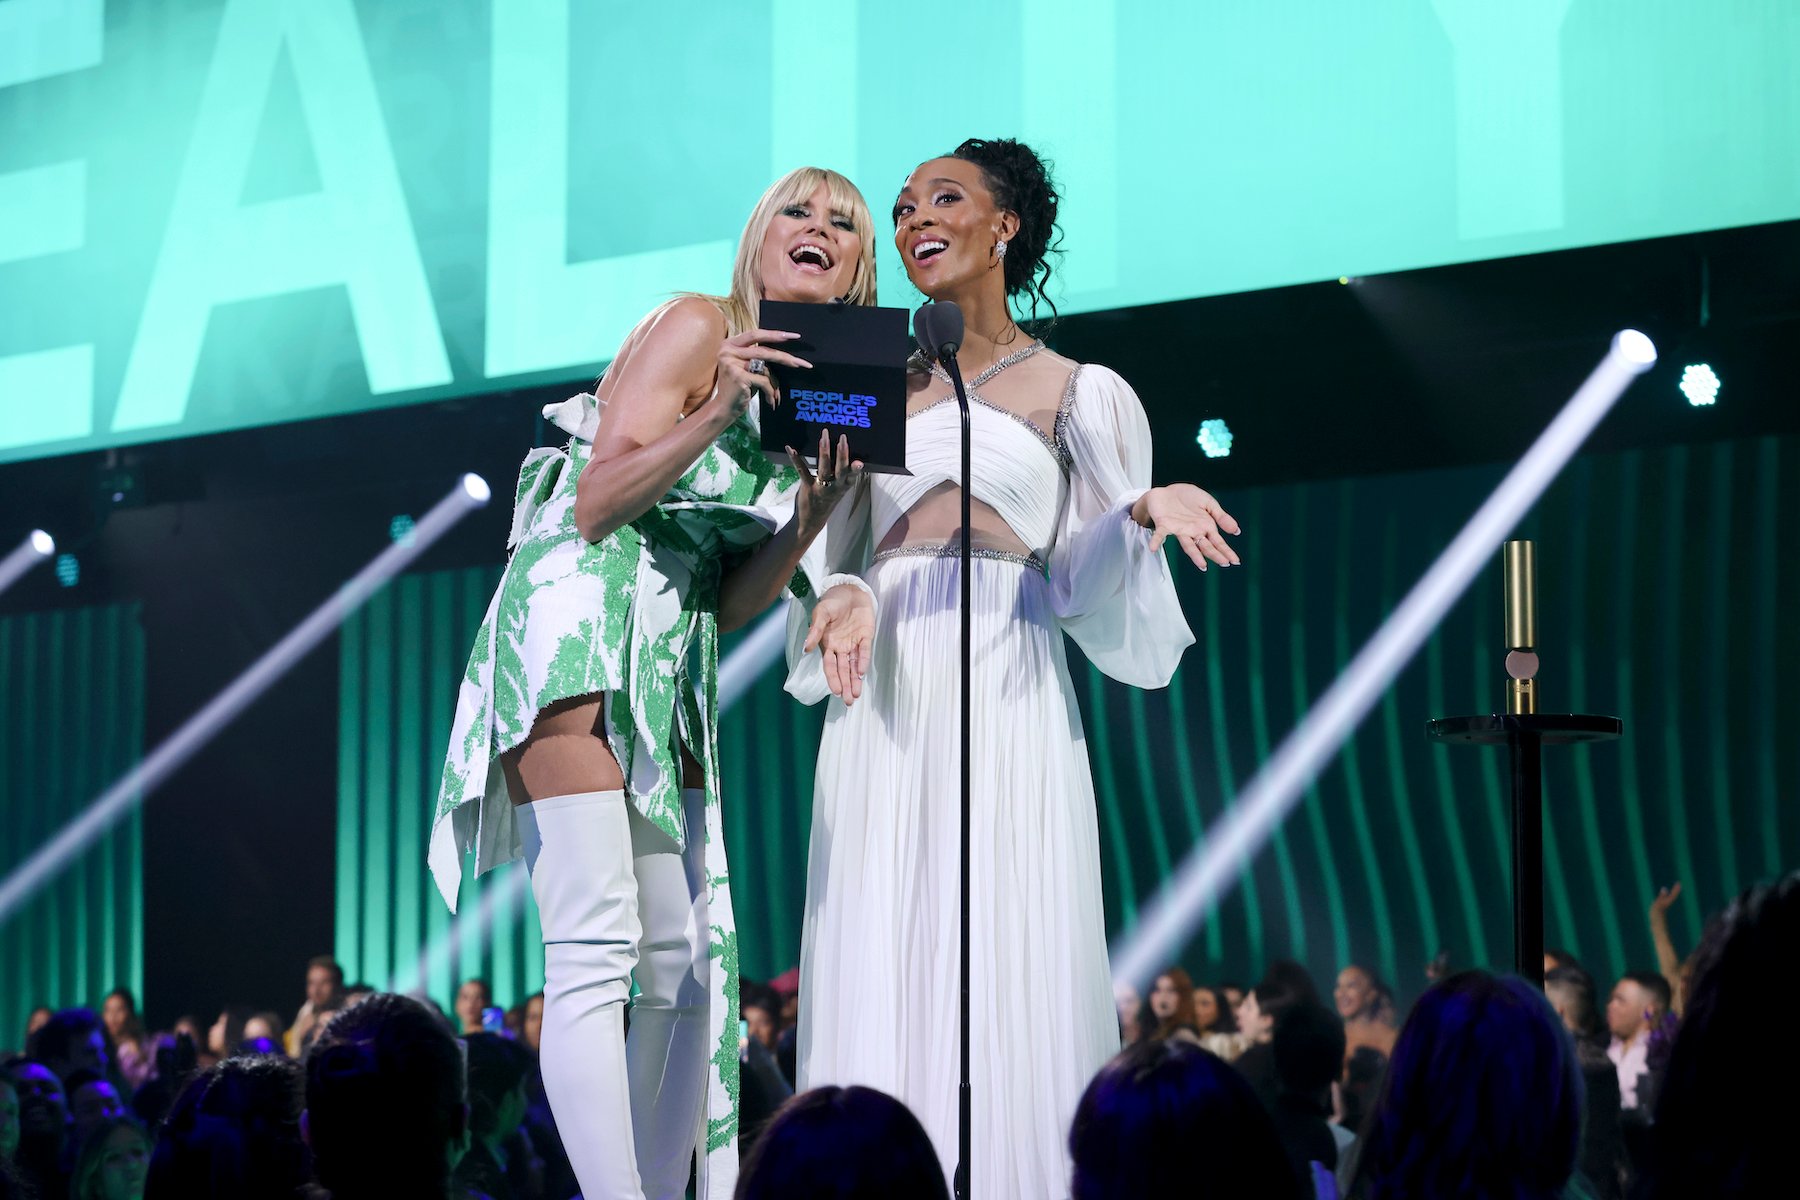 People’s Choice Awards 2022: The Complete List of Winners